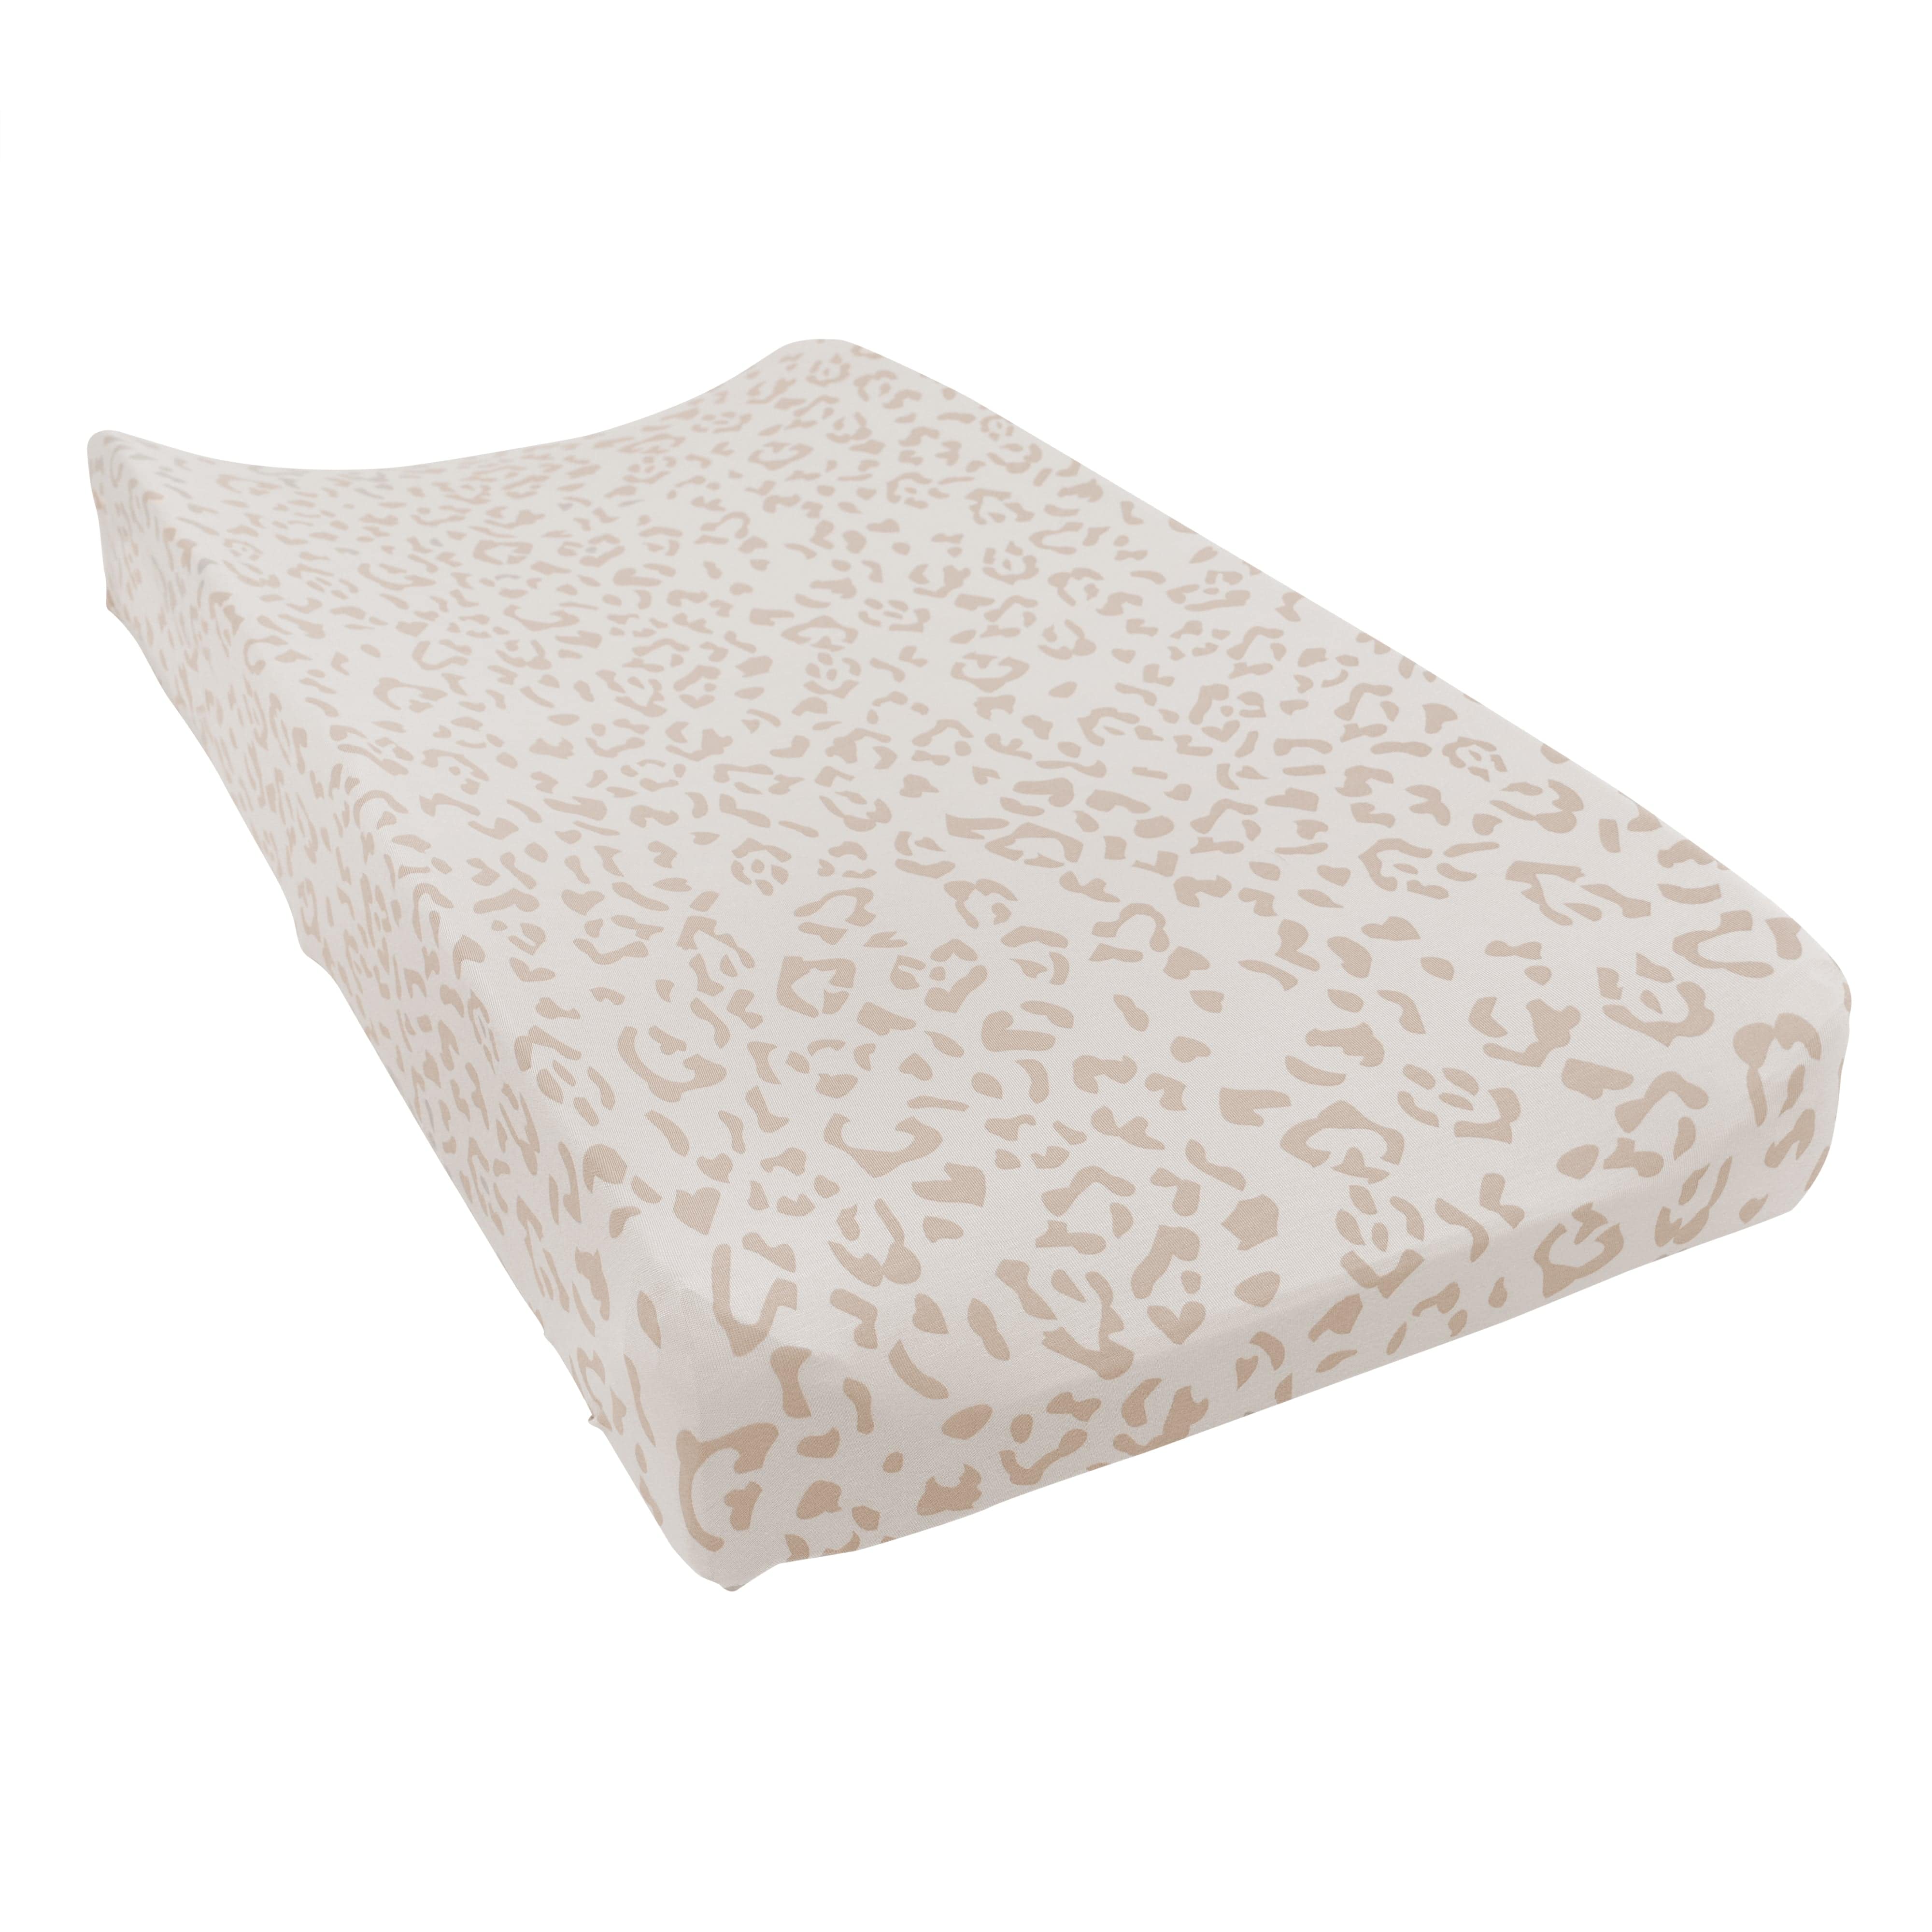 Kyte Baby Change Pad Cover Oat Leopard / One Size Change Pad Cover in Oat Leopard